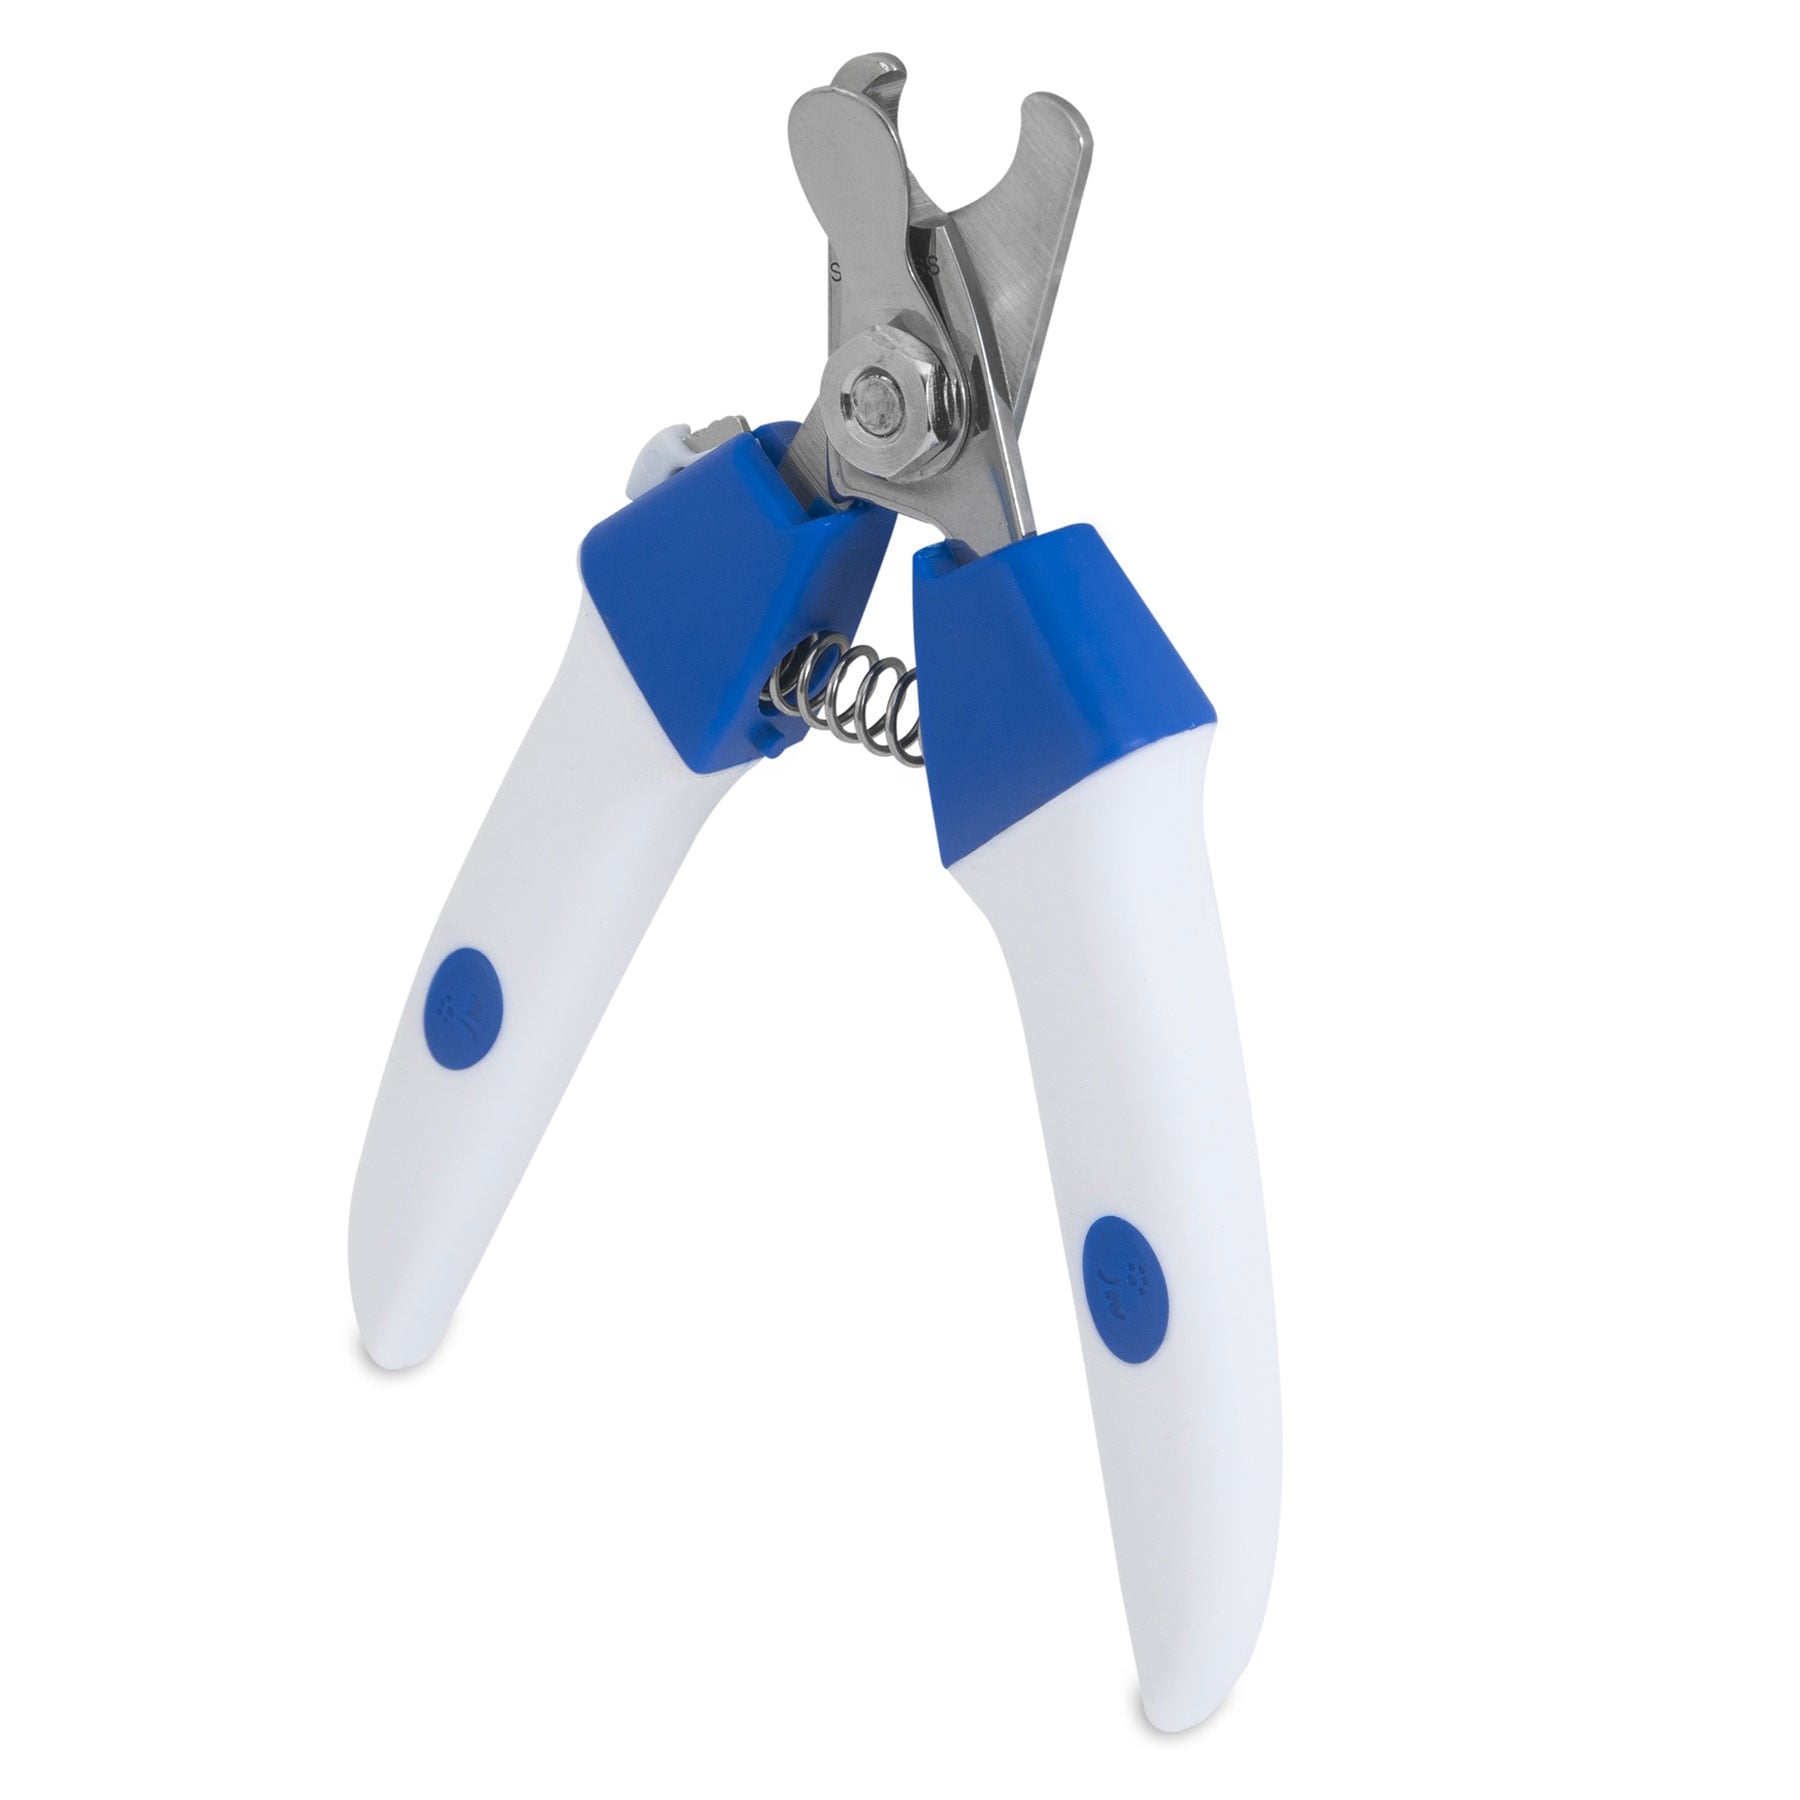 JW Gripsoft Deluxe Dog Nail Clipper. SKUS: 65015,65016